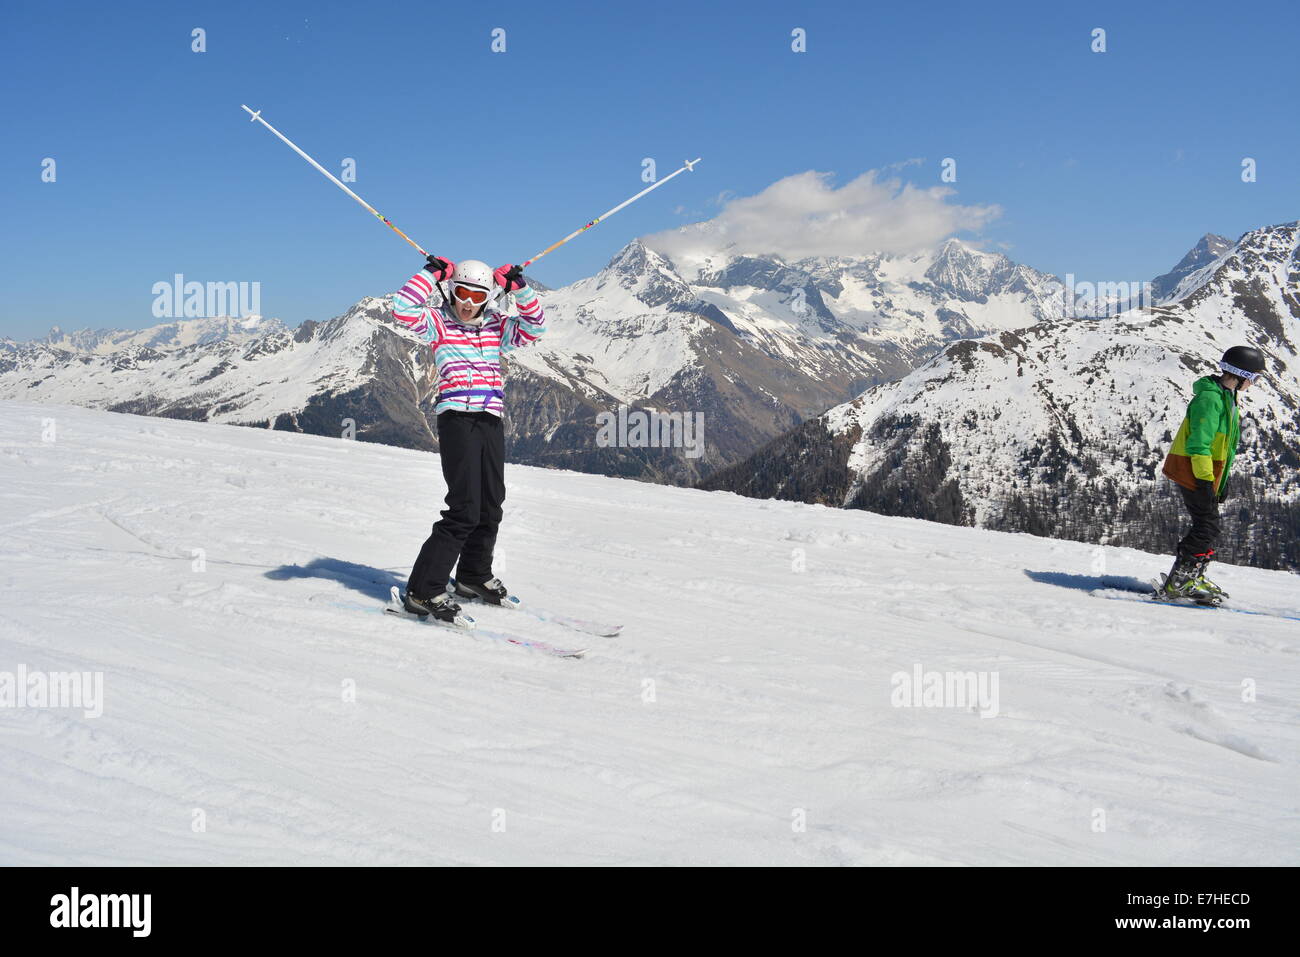 12 year old girl skiing doing ski horns with ski poles. Why do all skiers do this pose? Winter fun Ski holiday Healthy Christmas Stock Photo